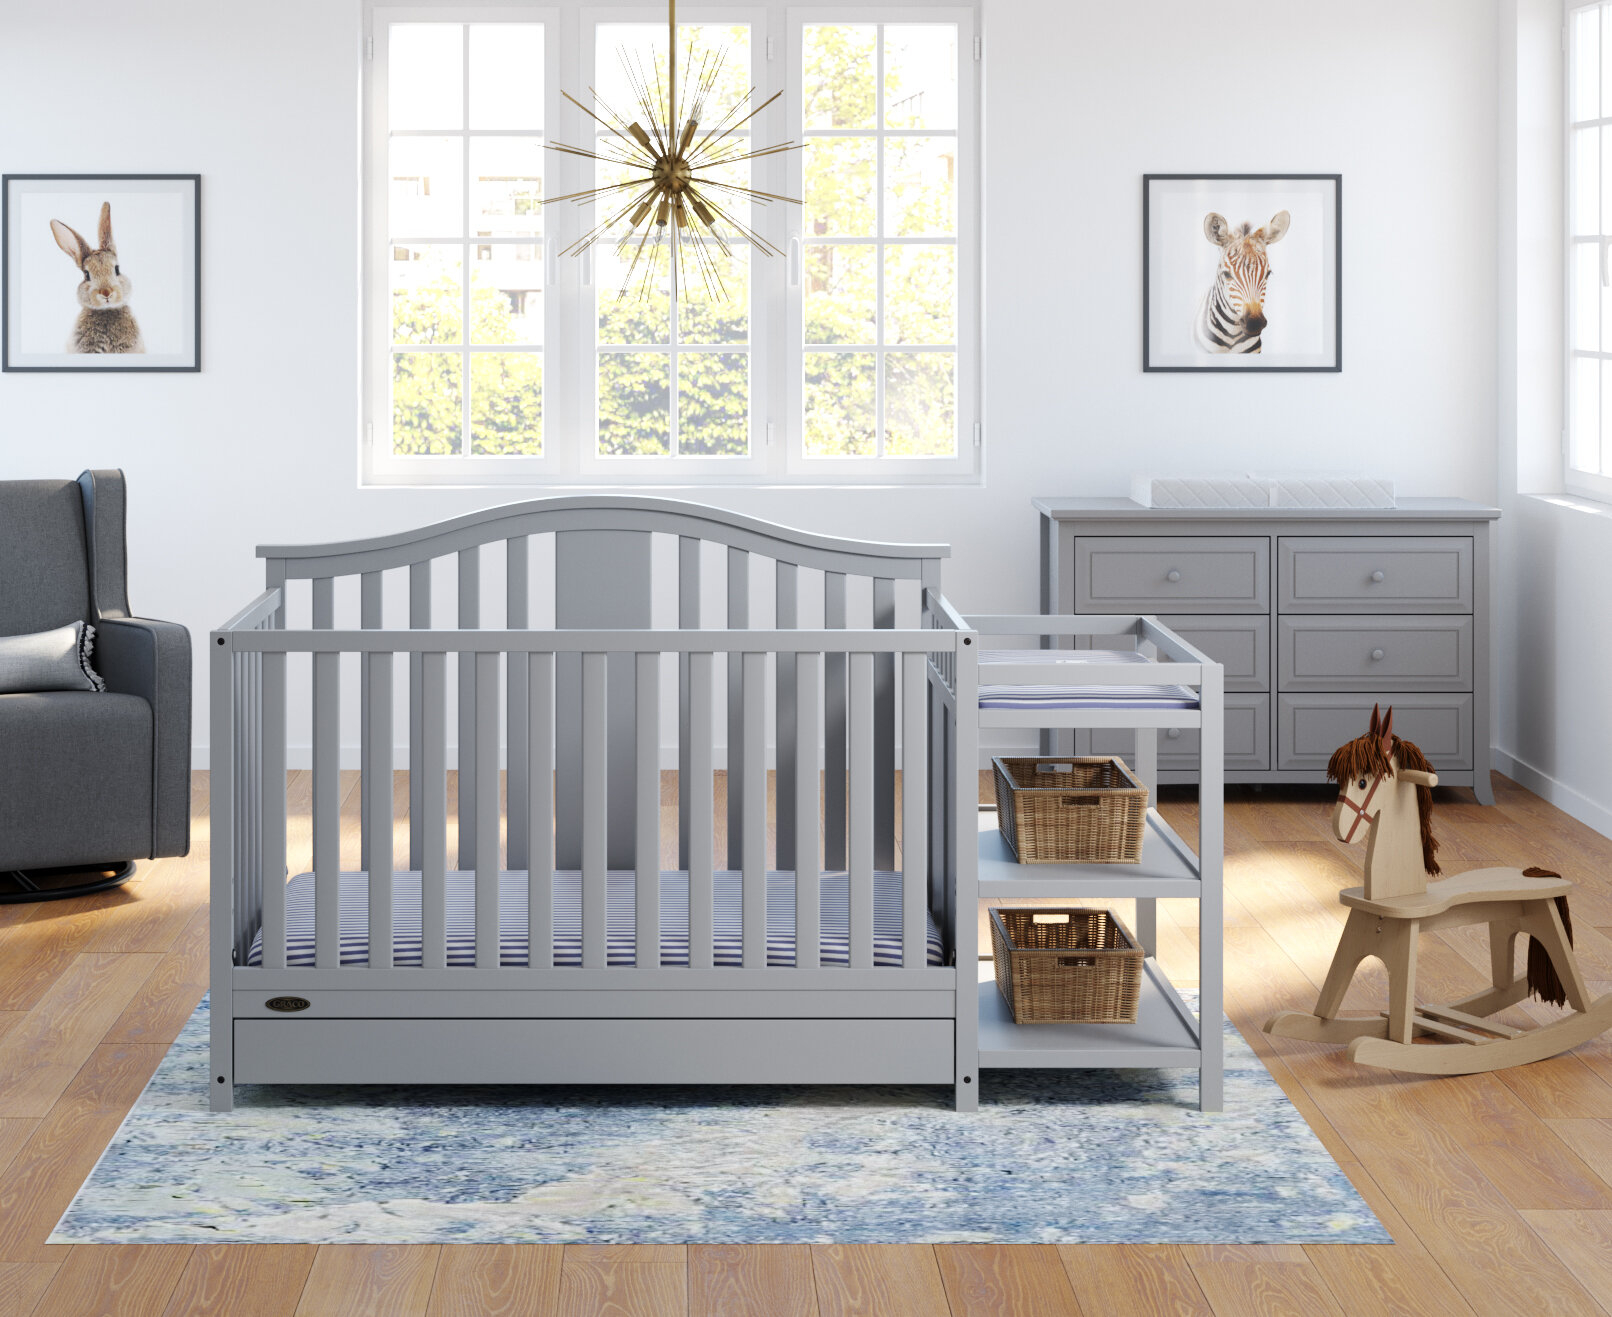 Solano Convertible Standard Crib And Changer Combo 2 Piece Nursery Furniture Set with regard to sizing 1612 X 1317